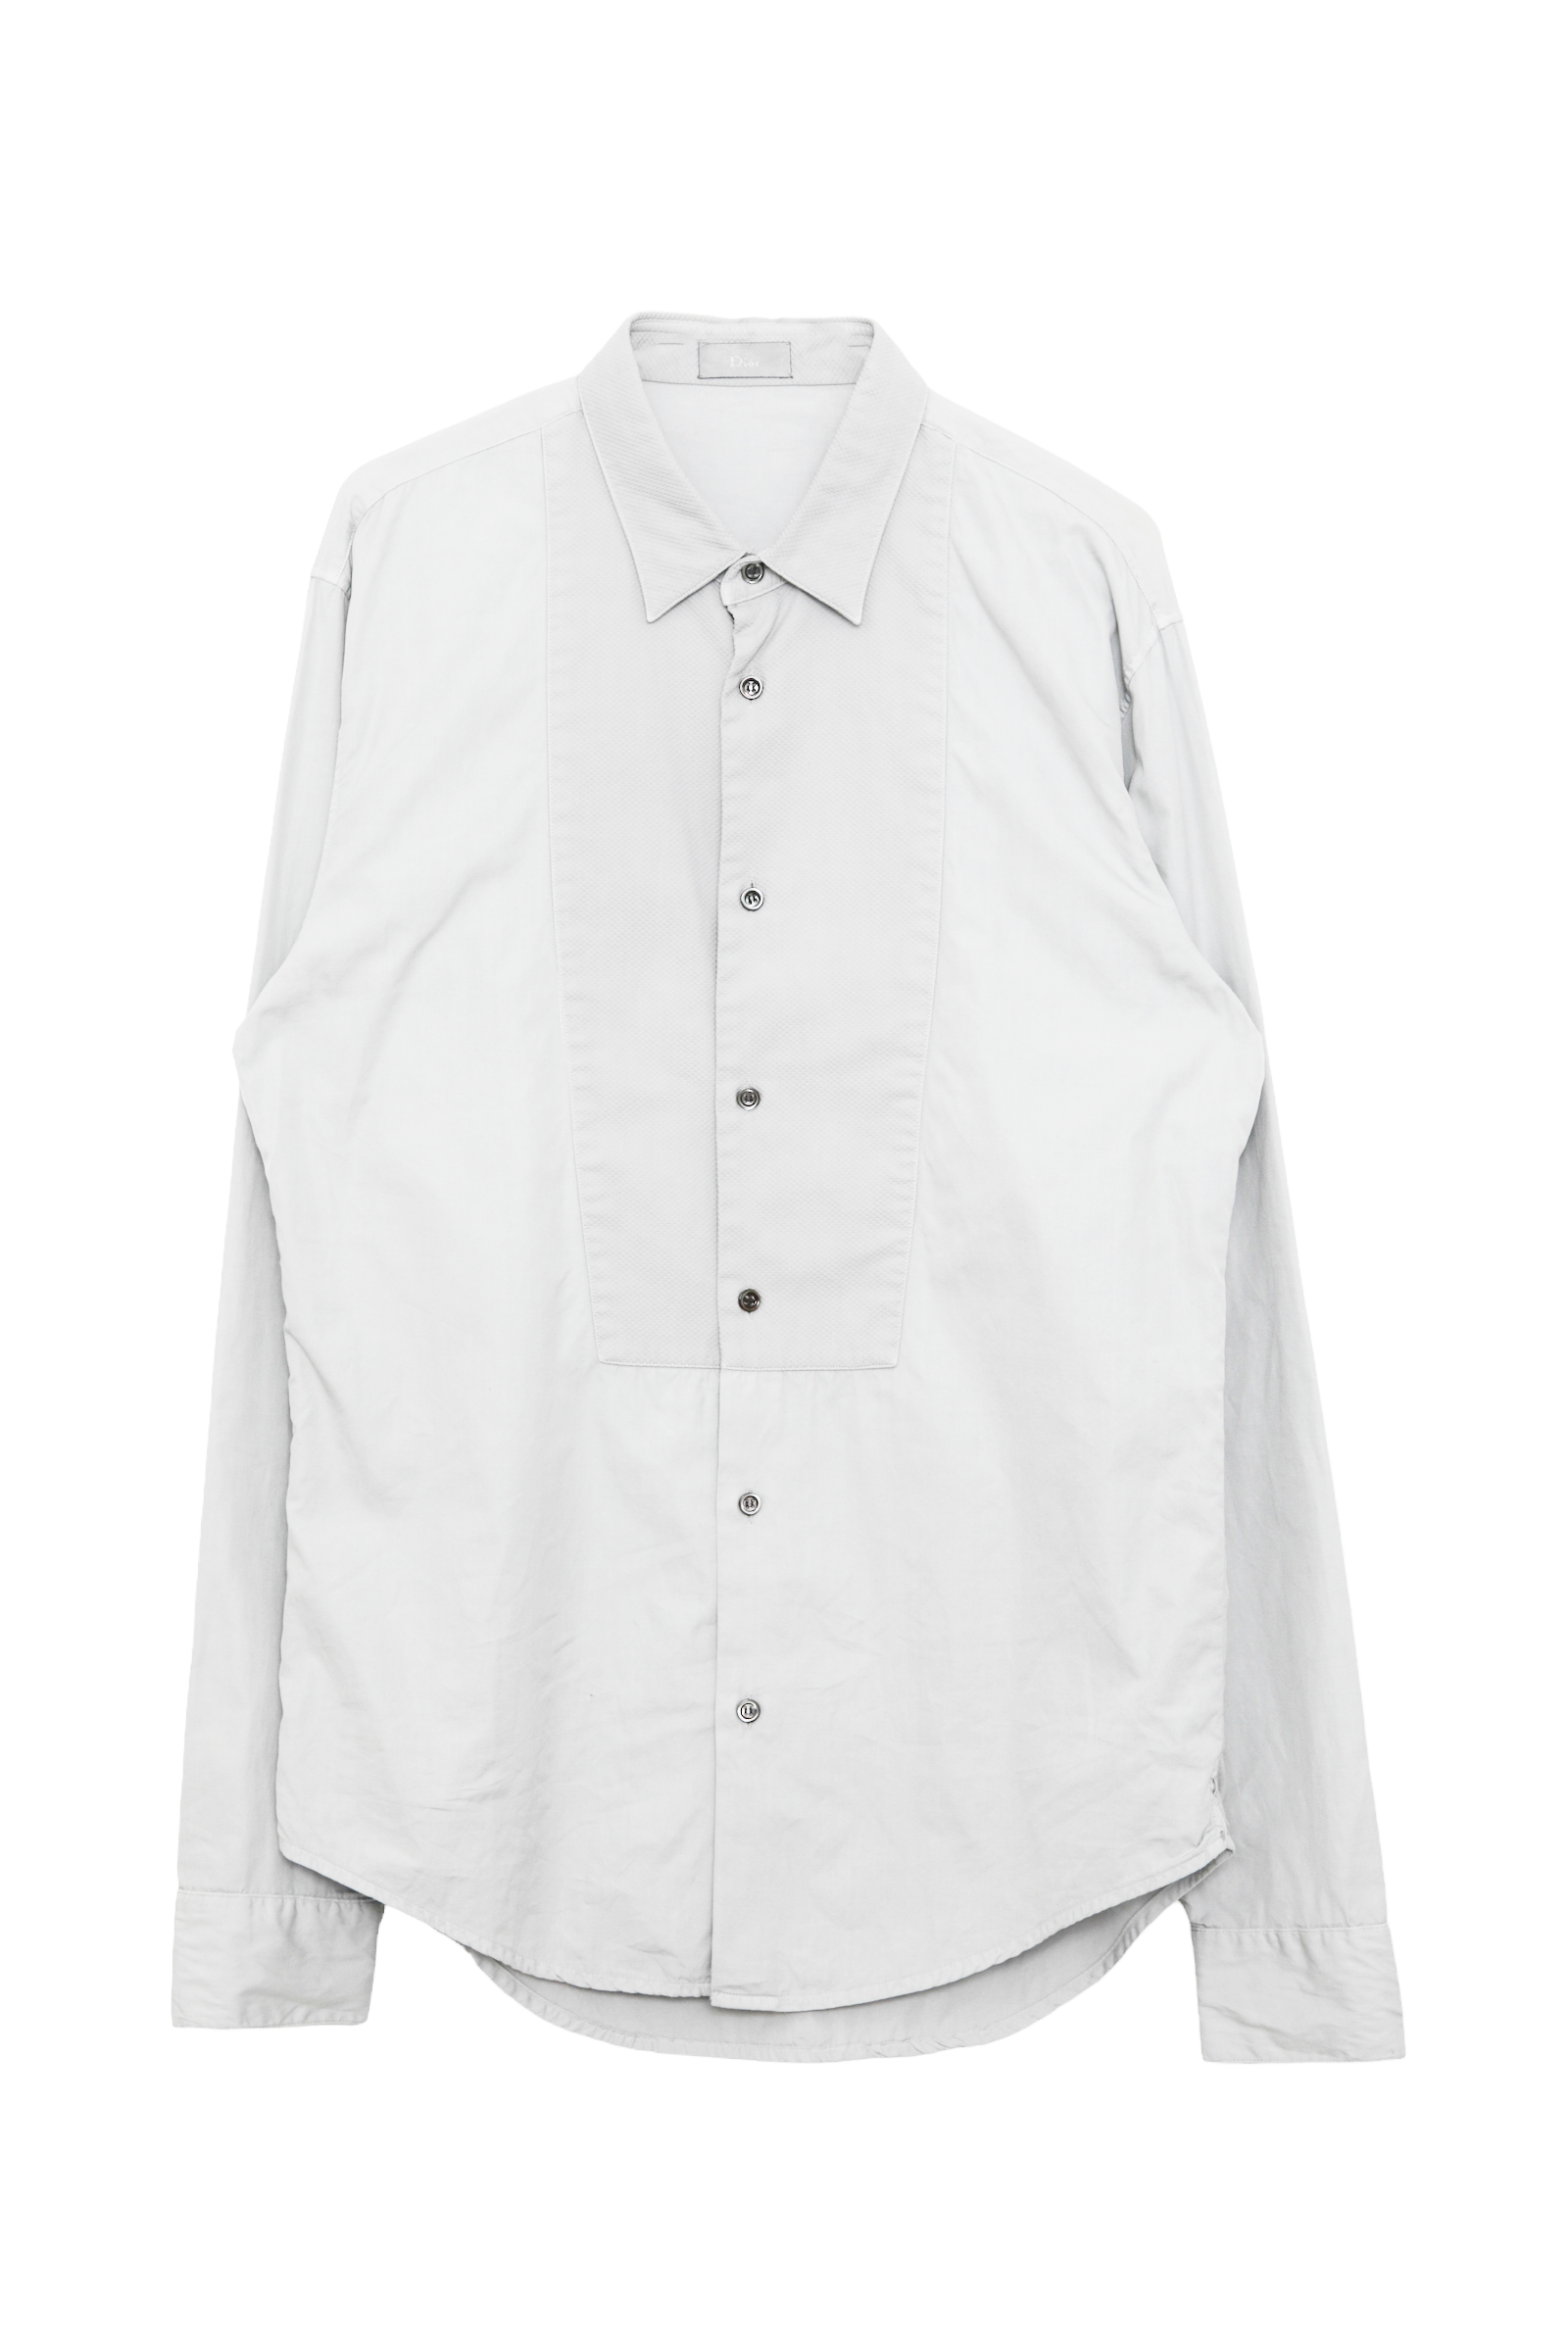 2005S/S DIOR HOMME BY HEDI SLIMANE SWITCHING COTTON SHIRT